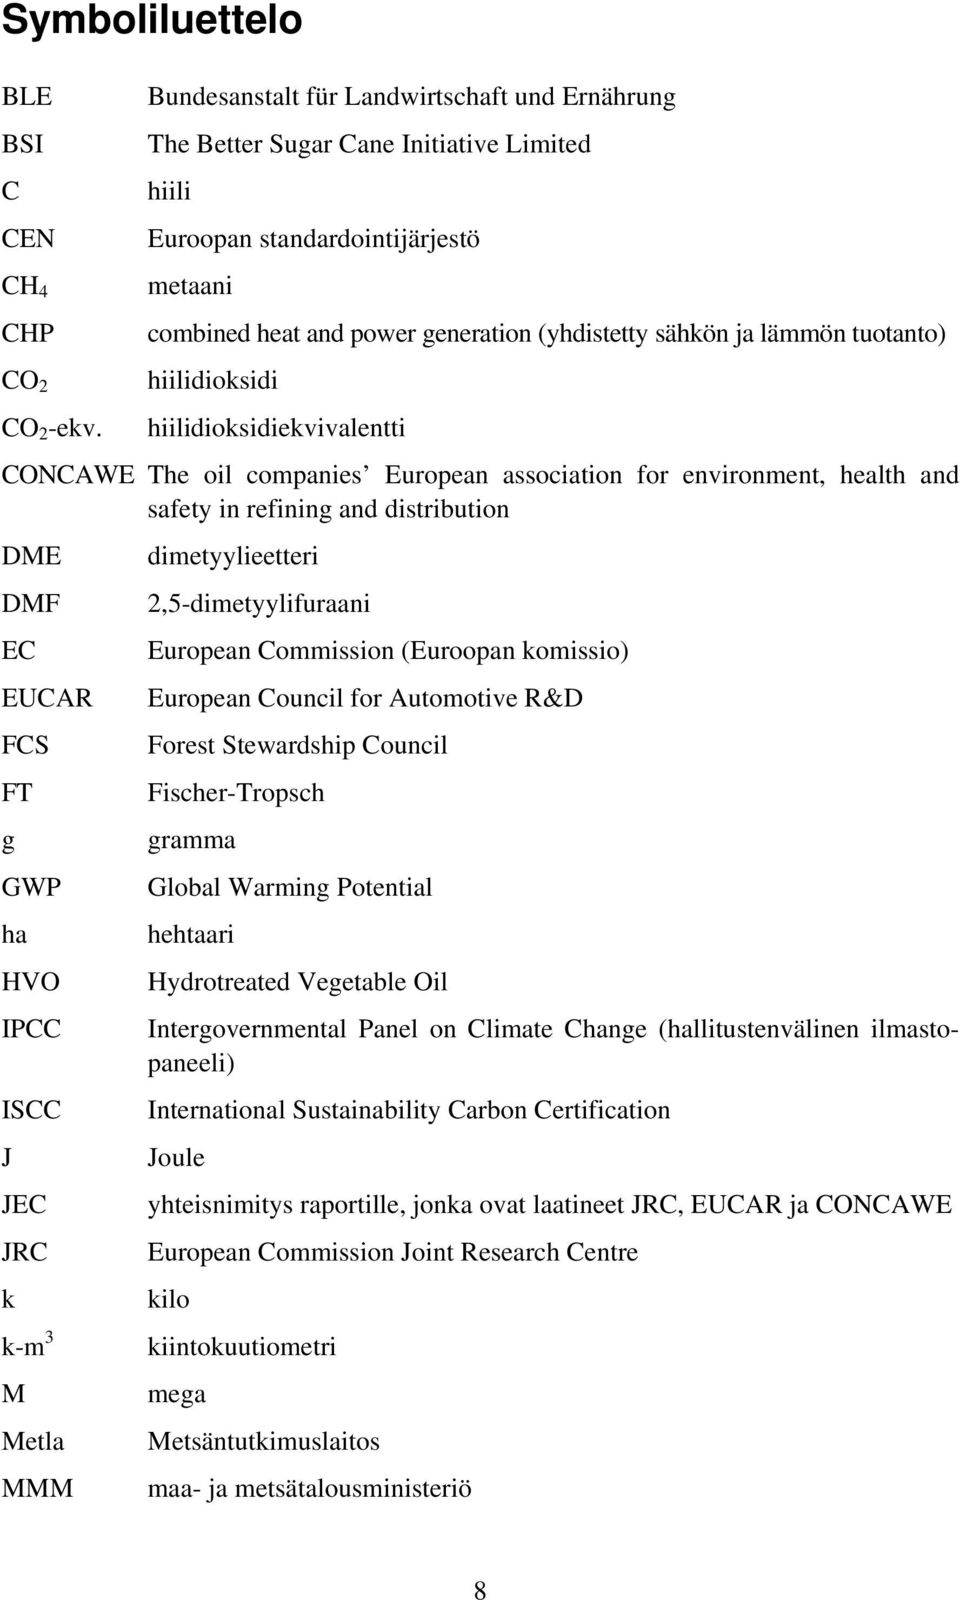 tuotanto) hiilidioksidi hiilidioksidiekvivalentti CONCAWE The oil companies European association for environment, health and safety in refining and distribution DME DMF EC EUCAR FCS FT g GWP ha HVO